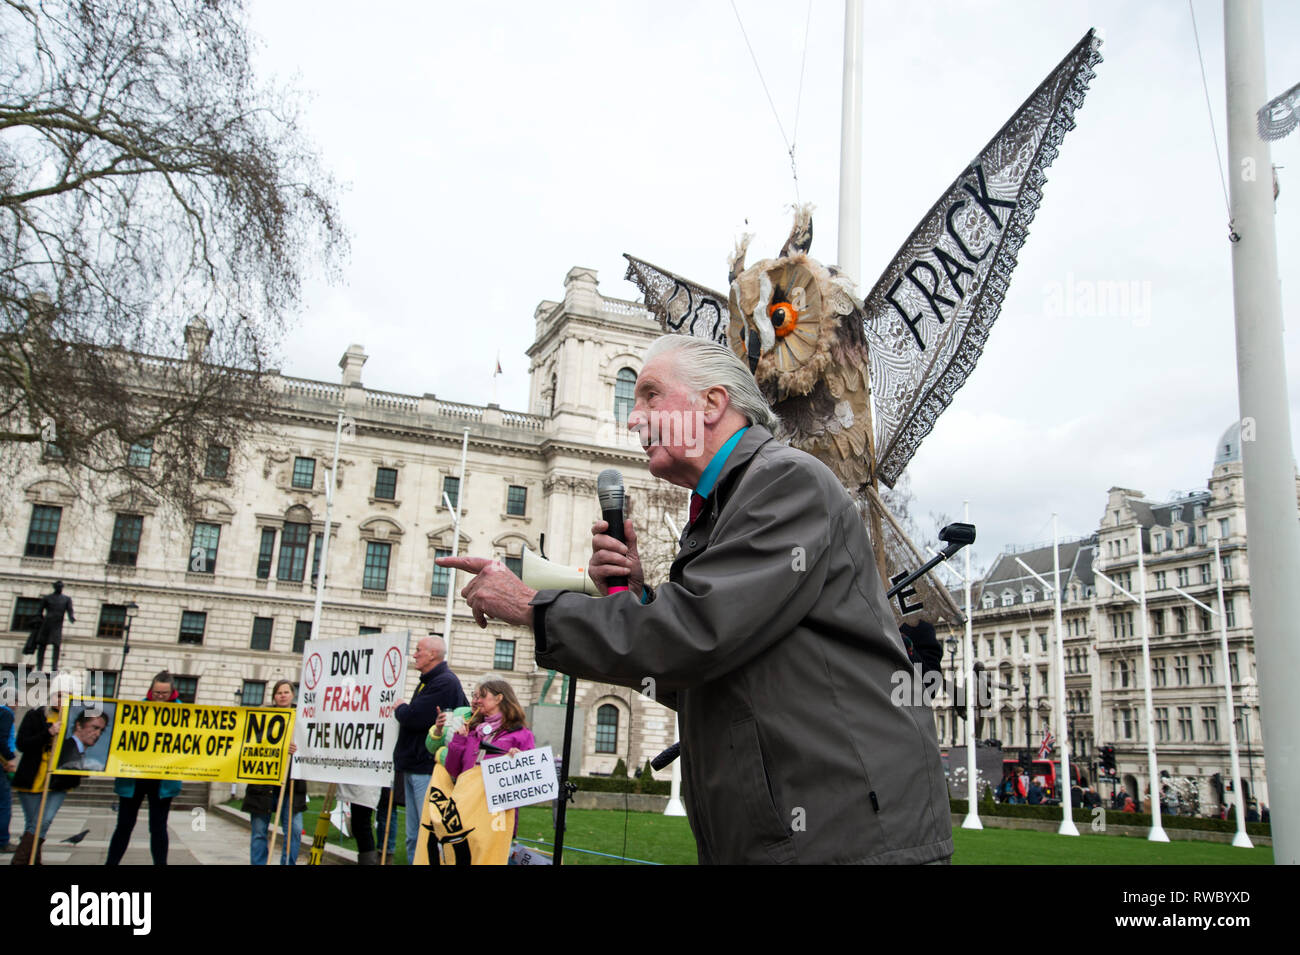 London, UK. 05th Mar, 2019. Parliament Square, Westminster, London. Protest against fracking in Derbyshire. Dennis Skinner, MP for Bolsover with a giant paper owl - rare owls are one species of wildlife threatened if fracking goes ahead. Credit: Jenny Matthews/Alamy Live News Stock Photo